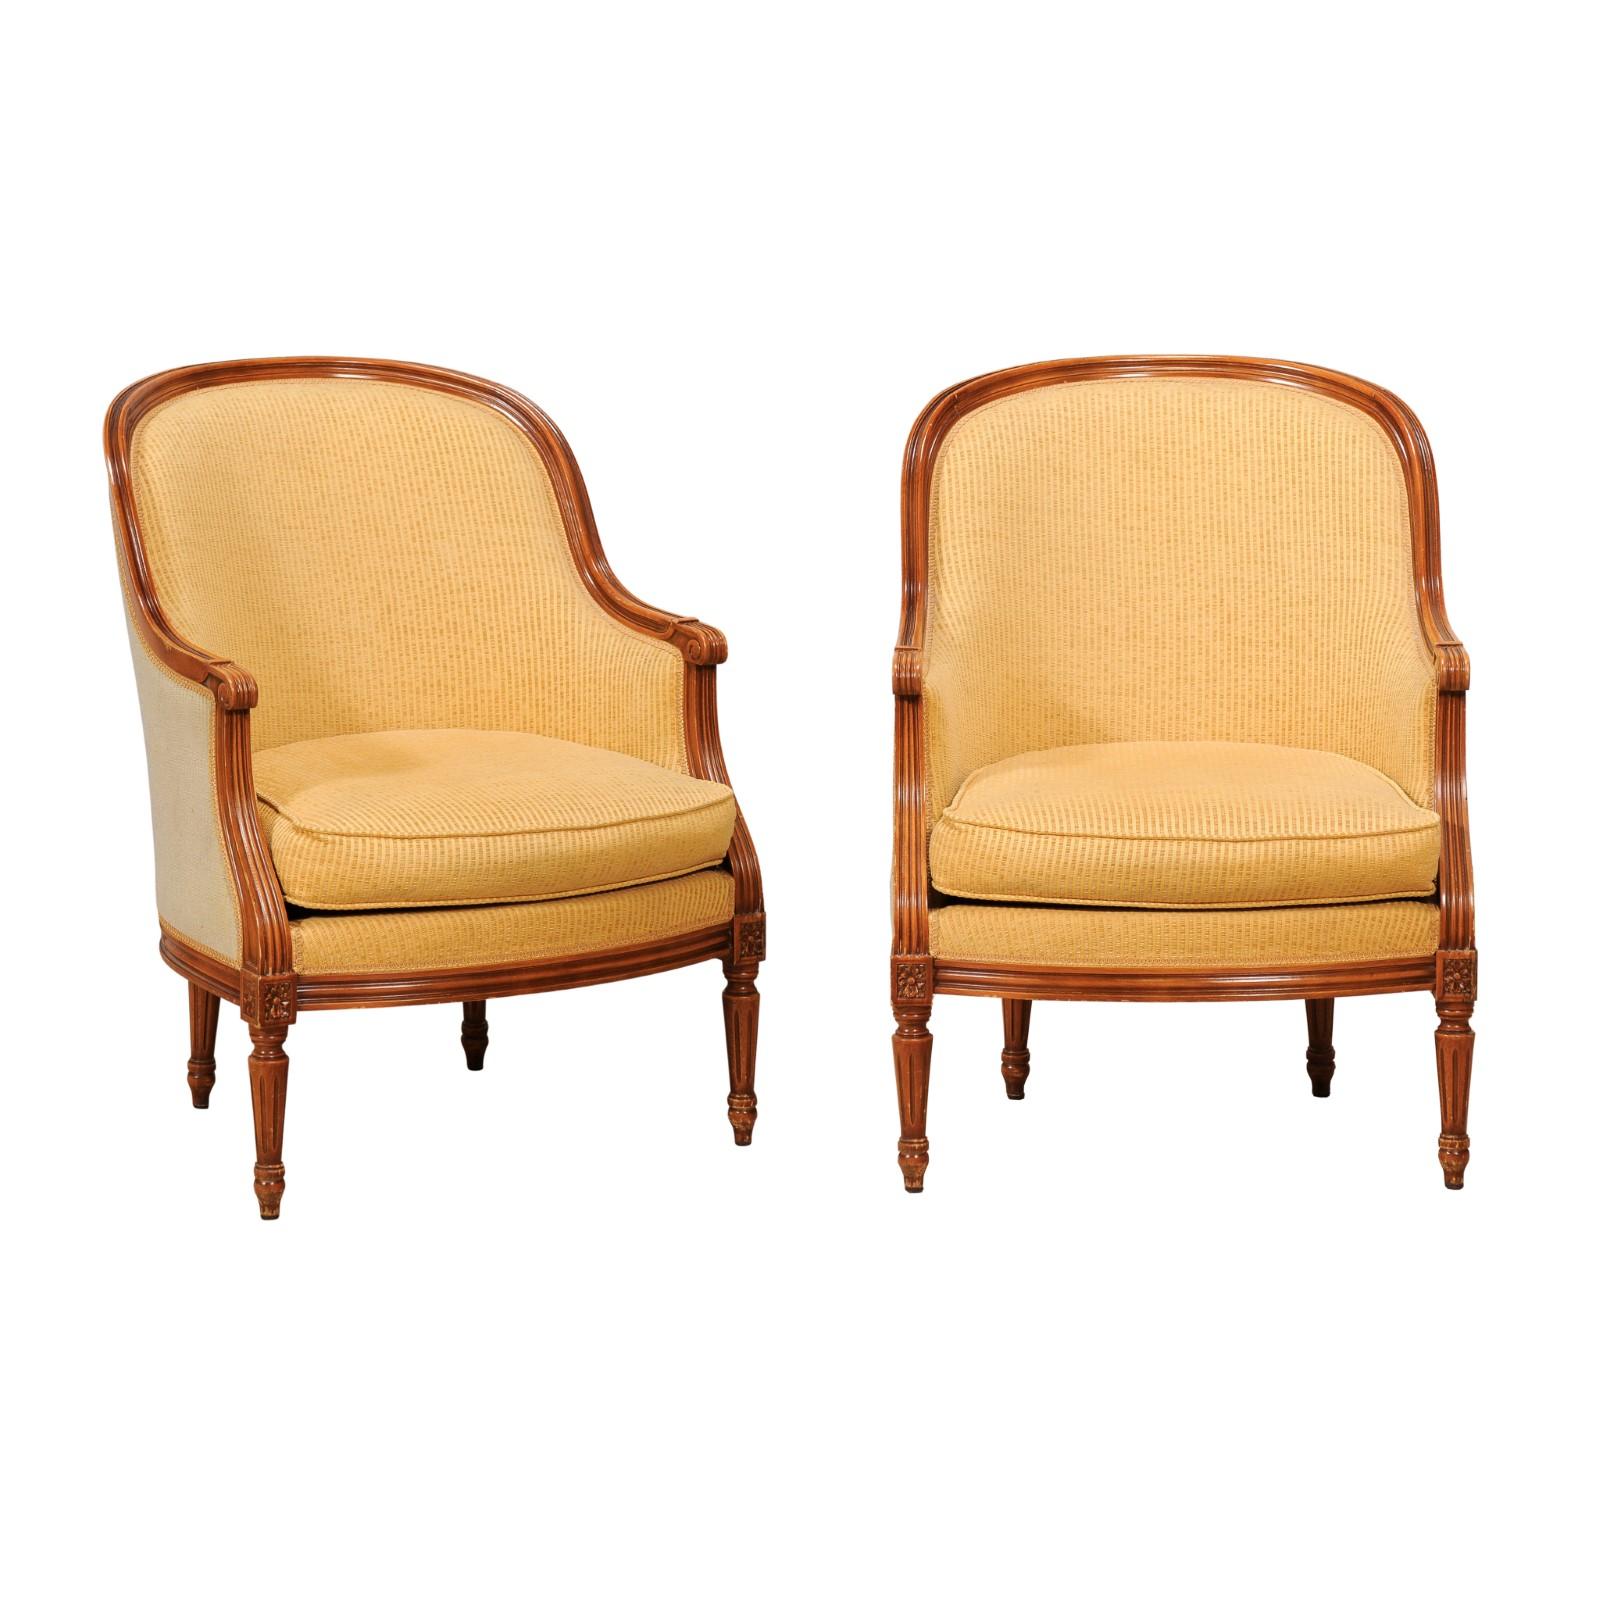 French Louis XVI Style Walnut Bergères Chairs with Wraparound Backs, Pair For Sale 12